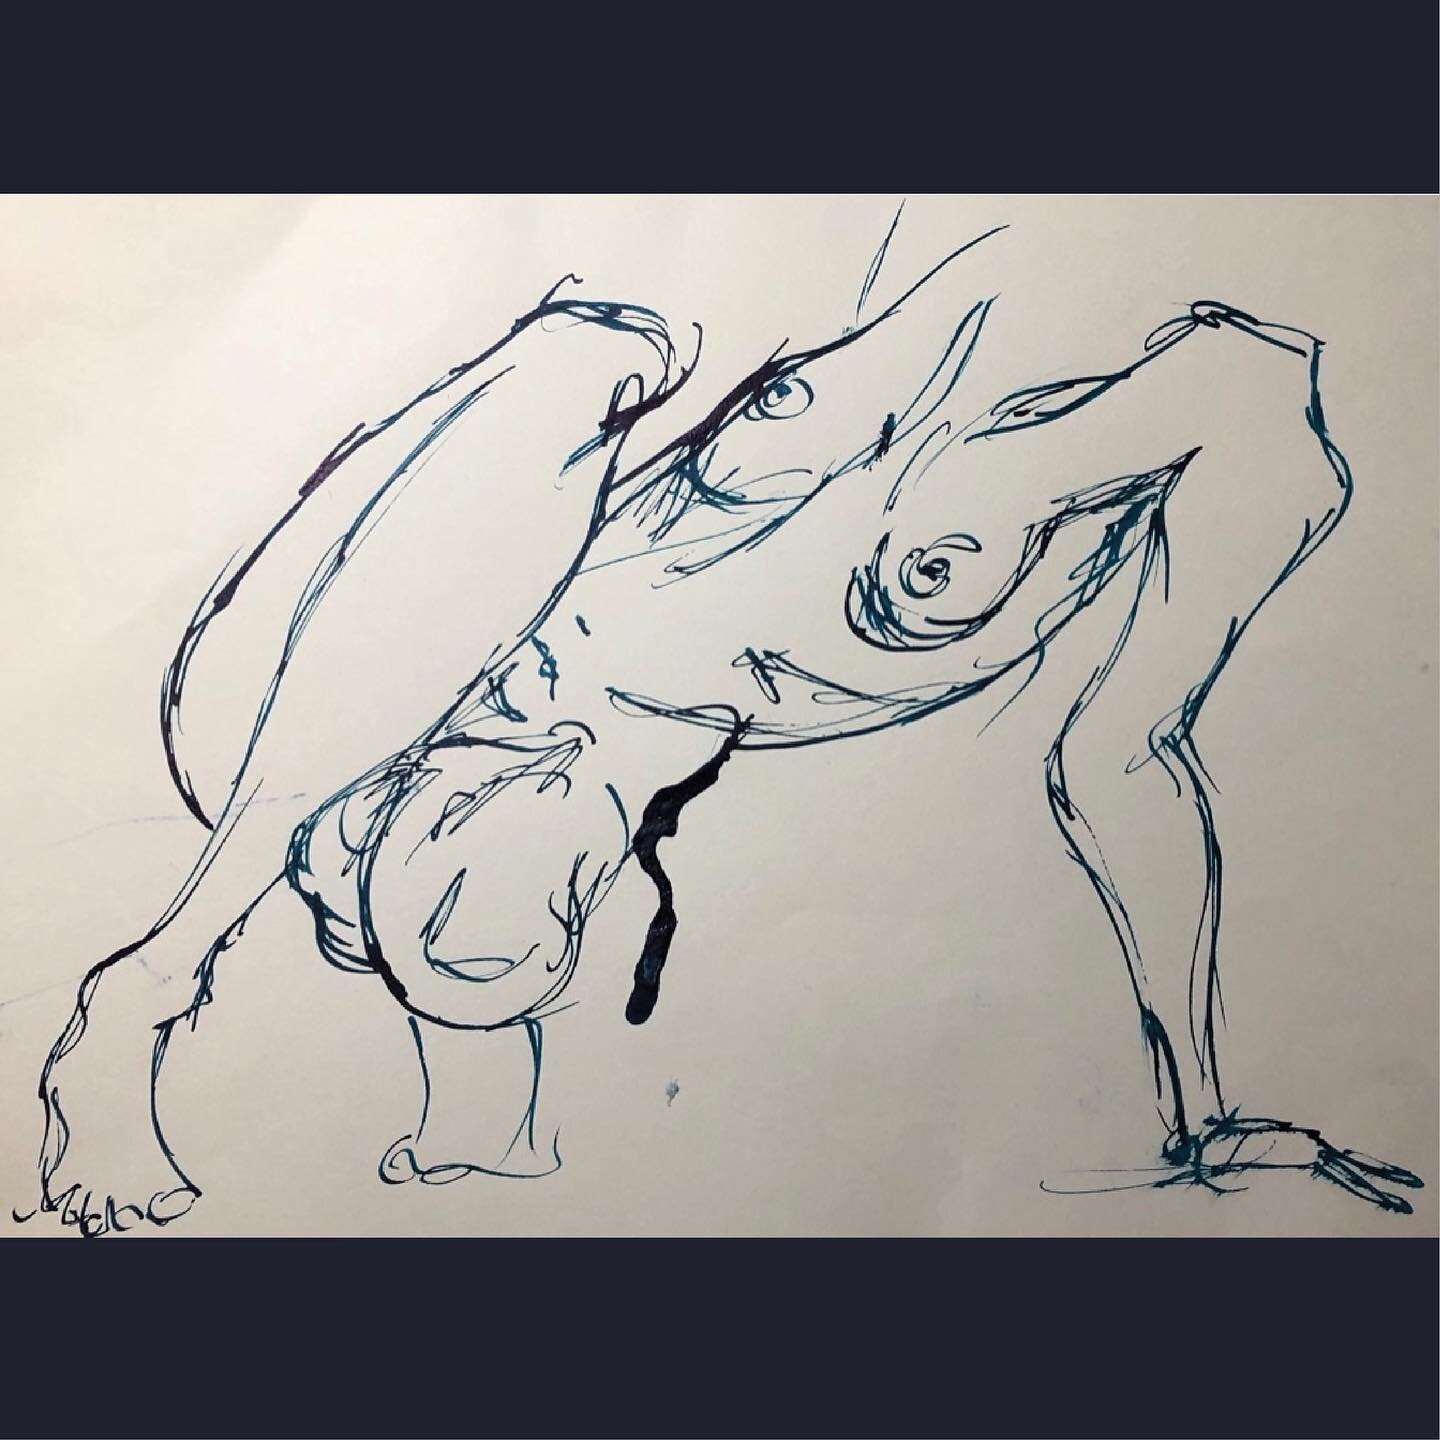 Some 5 minute poses from a stunning and dynamic session with @adriandutton_life_drawing and @priberry. 

ink and soft pastel on A4 

#lifedrawing #drawingfromlife #femalenude #fiveminutedrawing  #dynamicposes